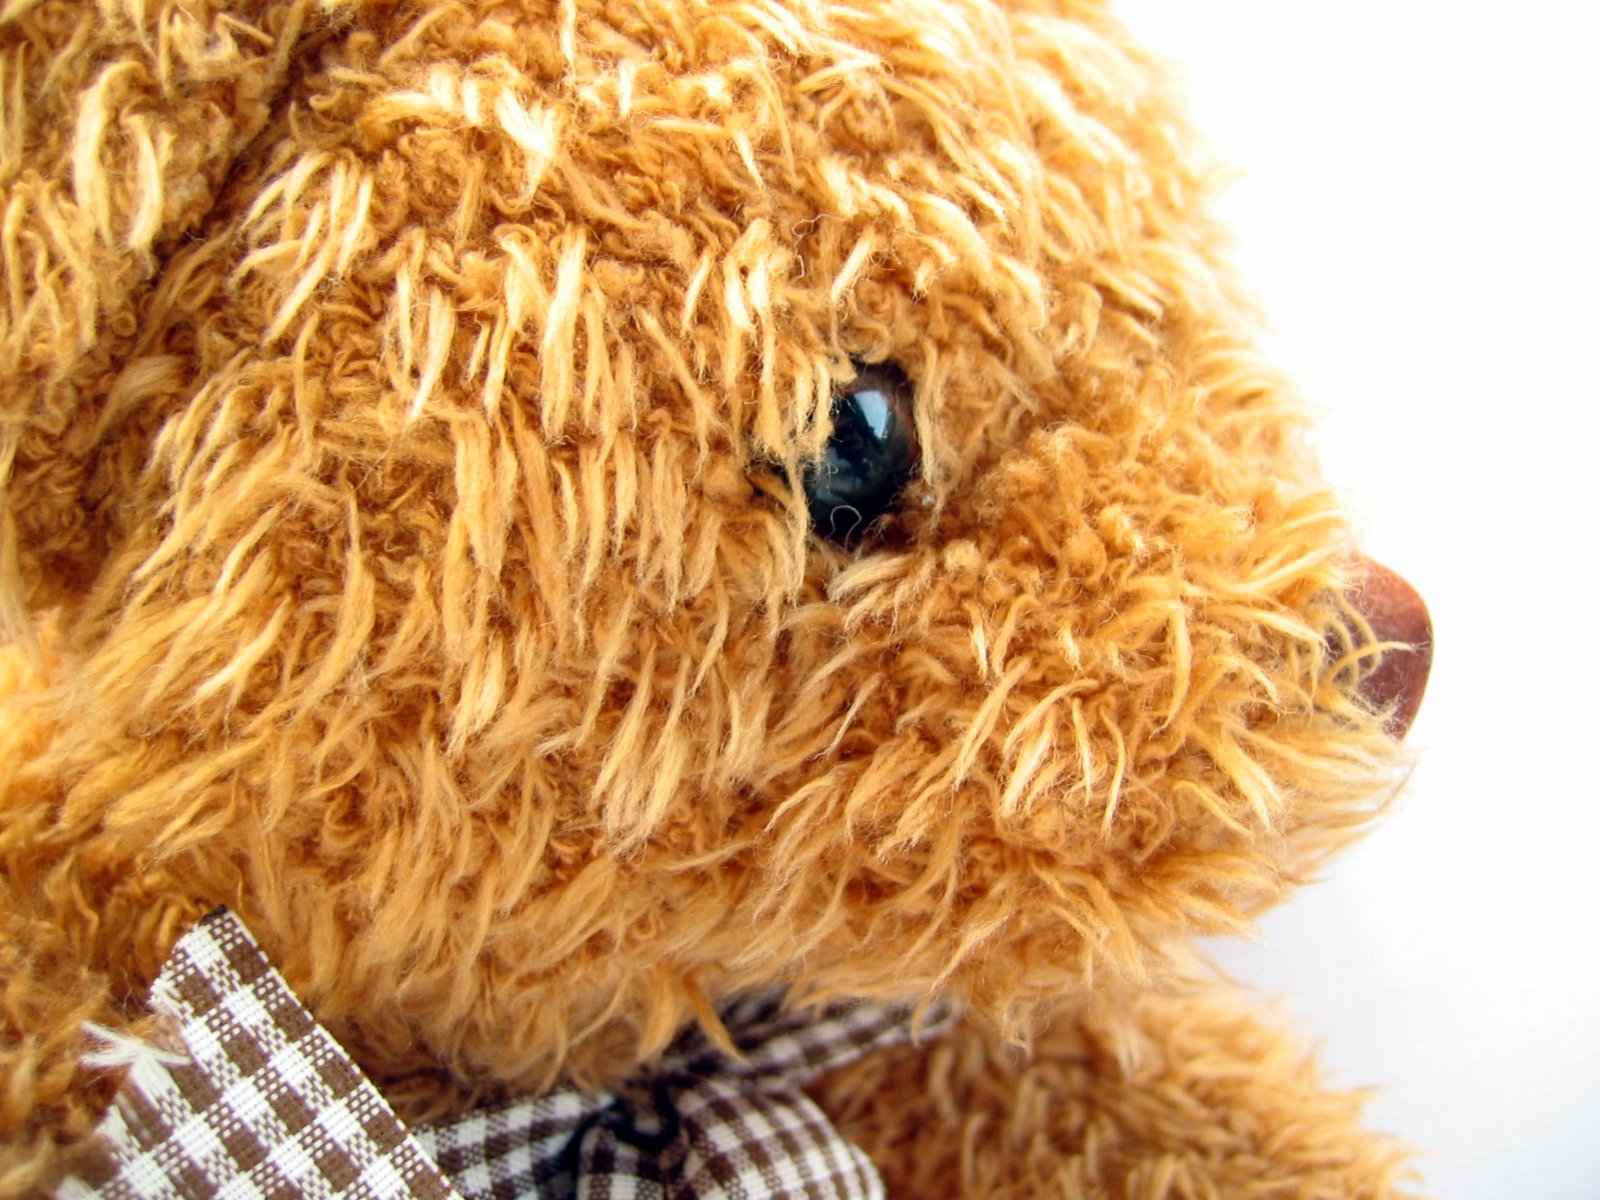 a close up s of a brown bear wearing a tie